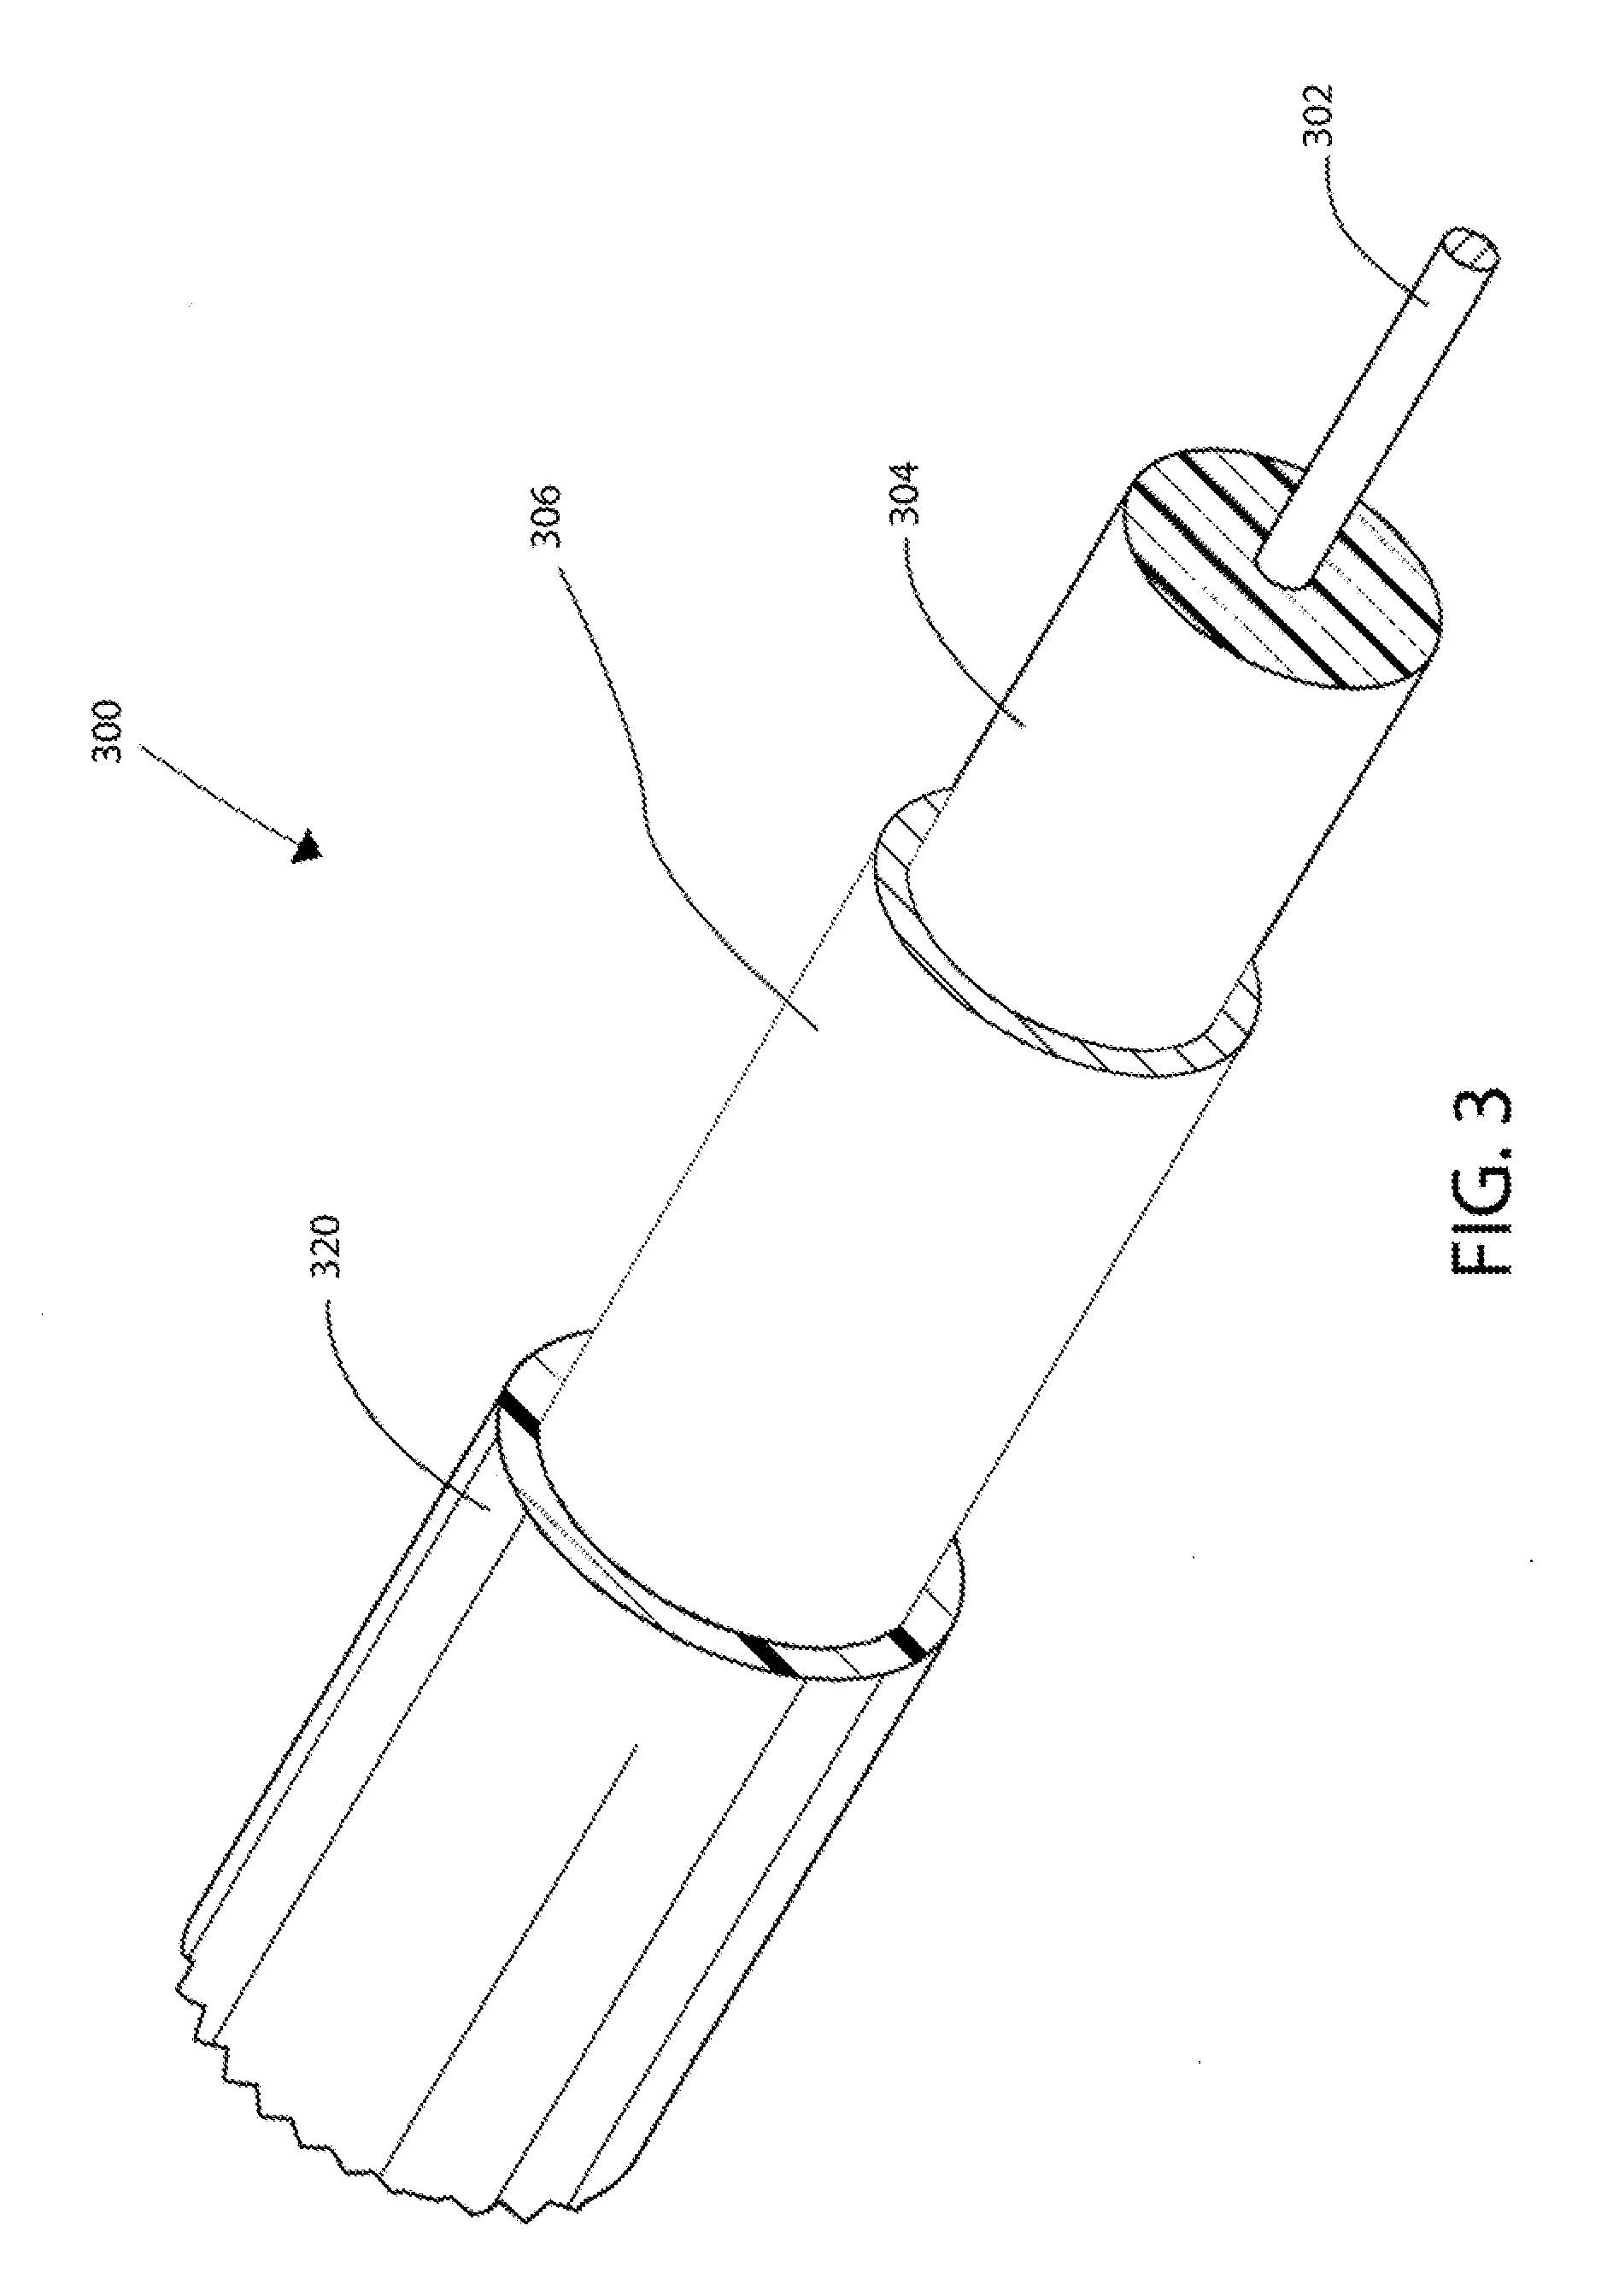 Conductive elastomer and method of applying a conductive coating to a cable